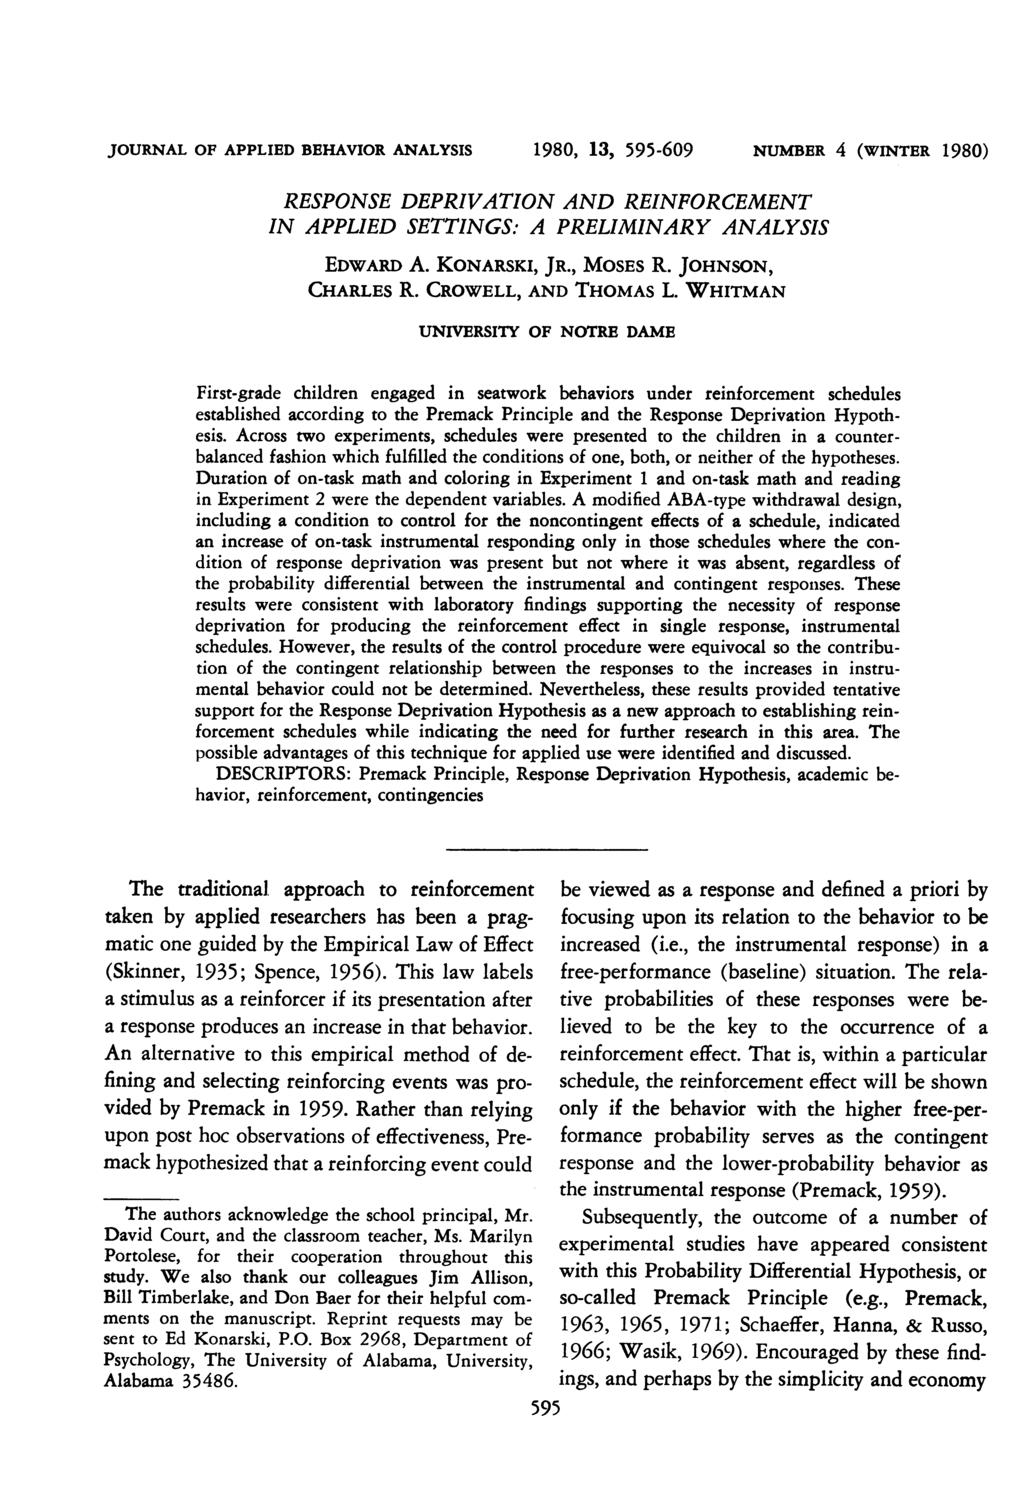 JOURNAL OF APPLIED BEHAVIOR ANALYSIS 1980, 133, 595-609 NUMBER 4 (WINTER 1980) RESPONSE DEPRIVATION AND REINFORCEMENT IN APPLIED SETTINGS: A PRELIMINARY ANALYSIS EDWARD A. KONARSKI, JR., MOSES R.